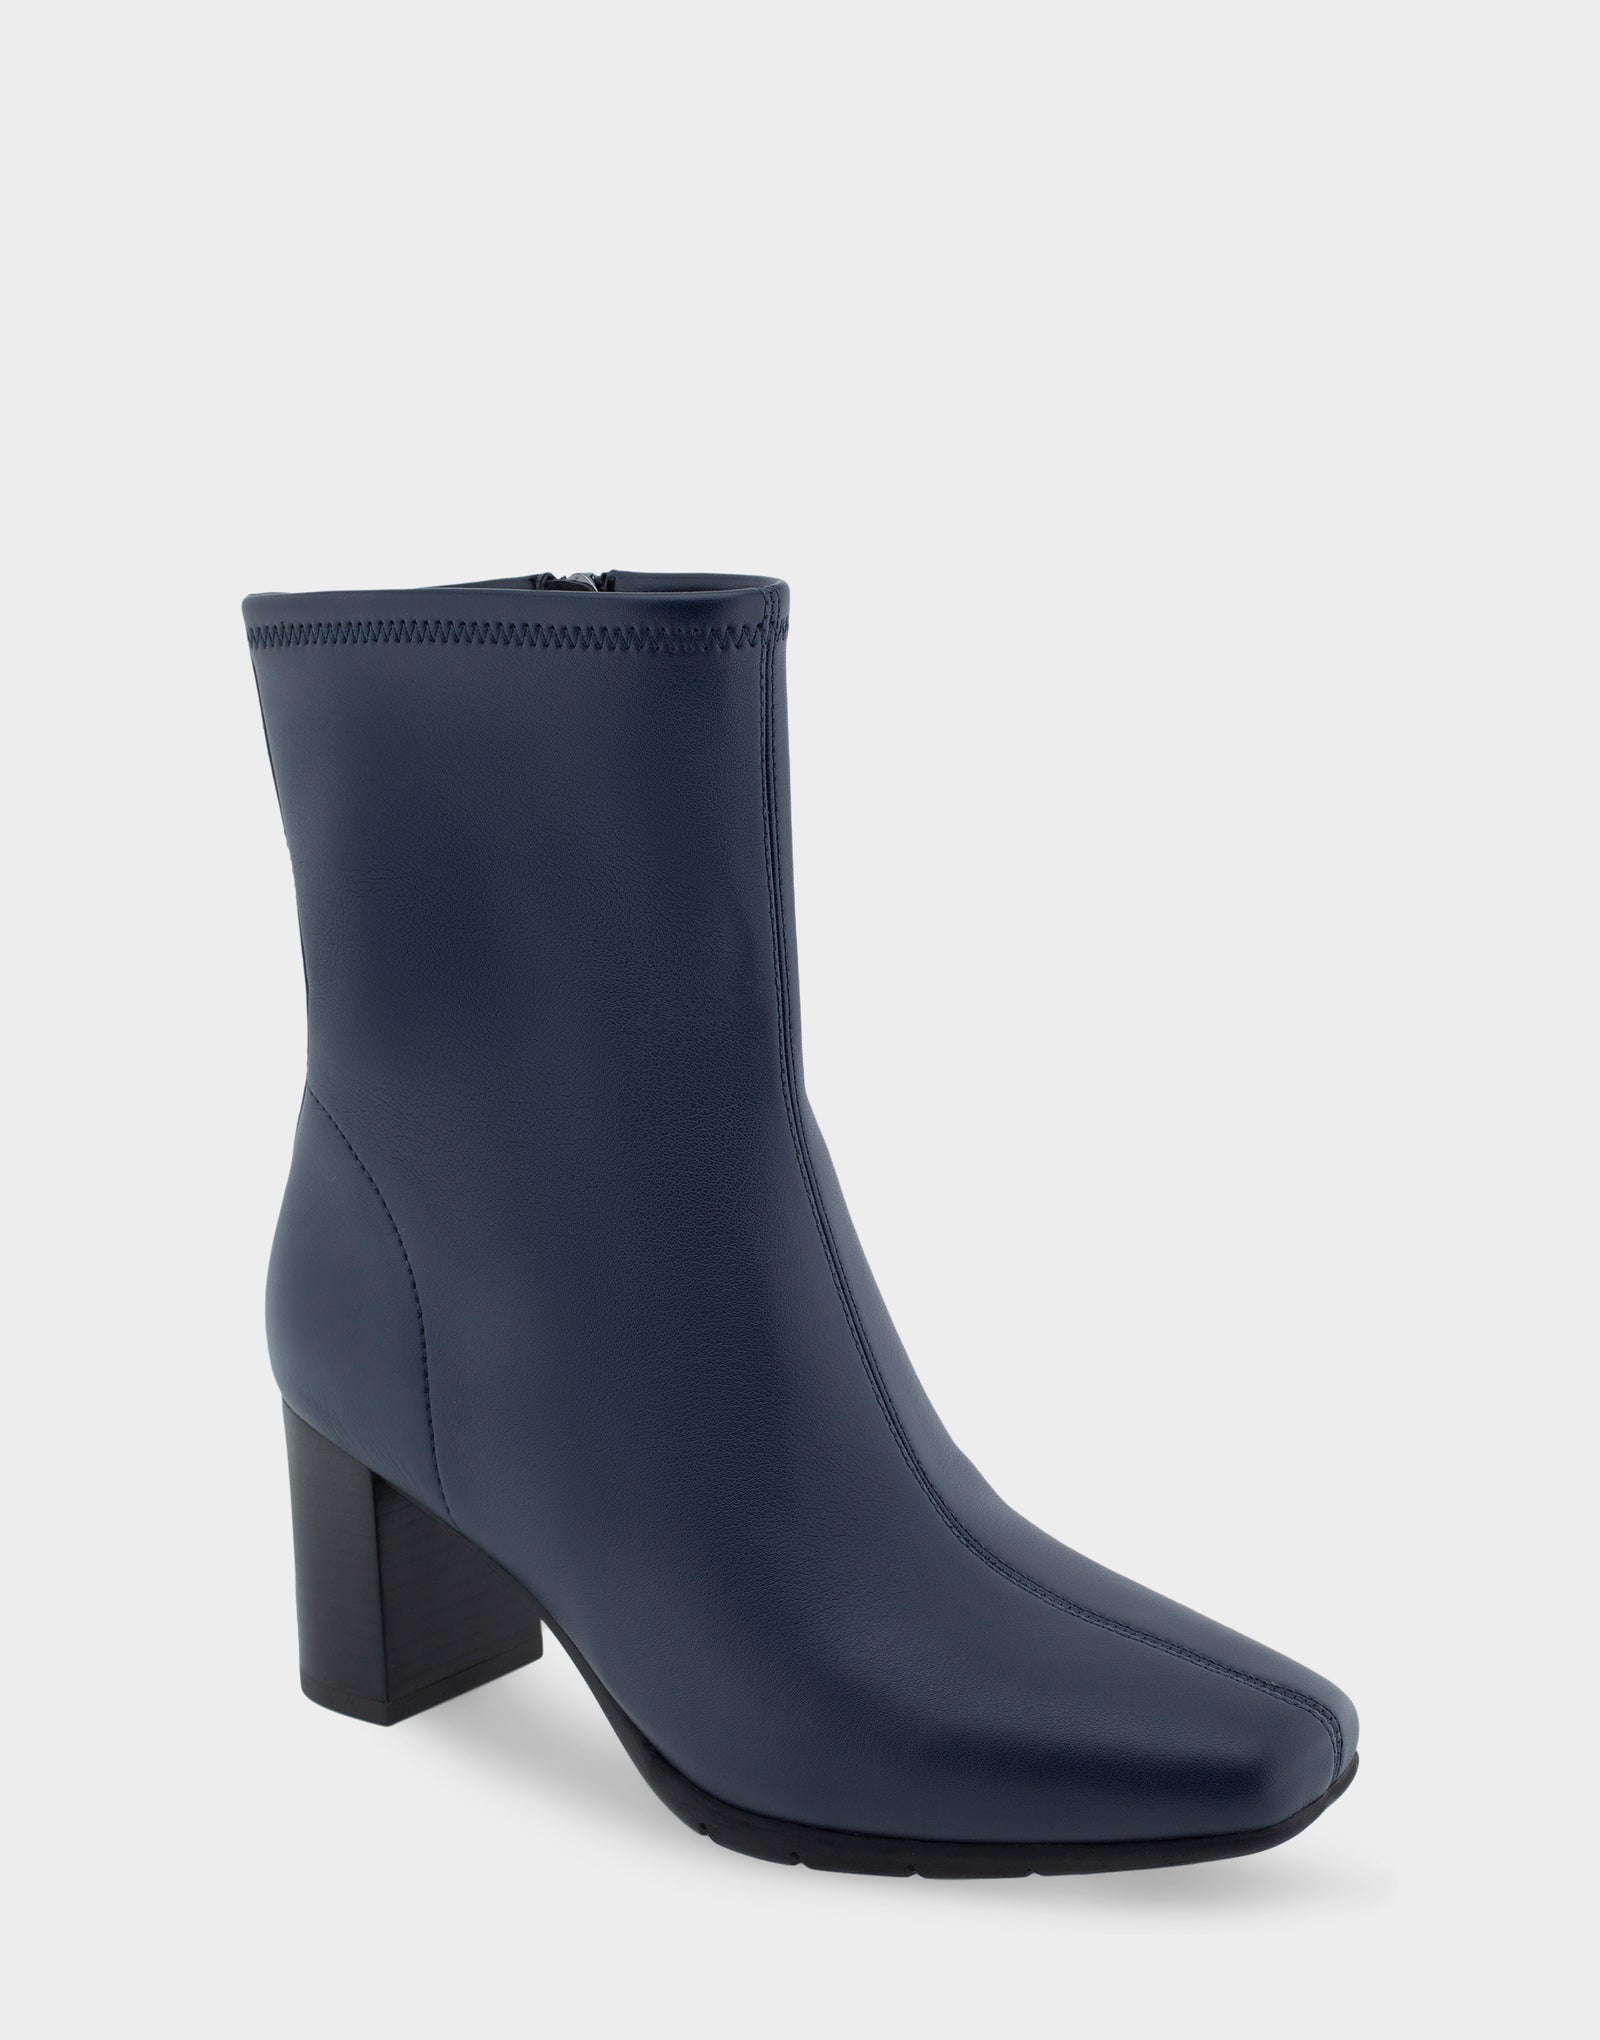 Women's Heeled Ankle Boot in Navy